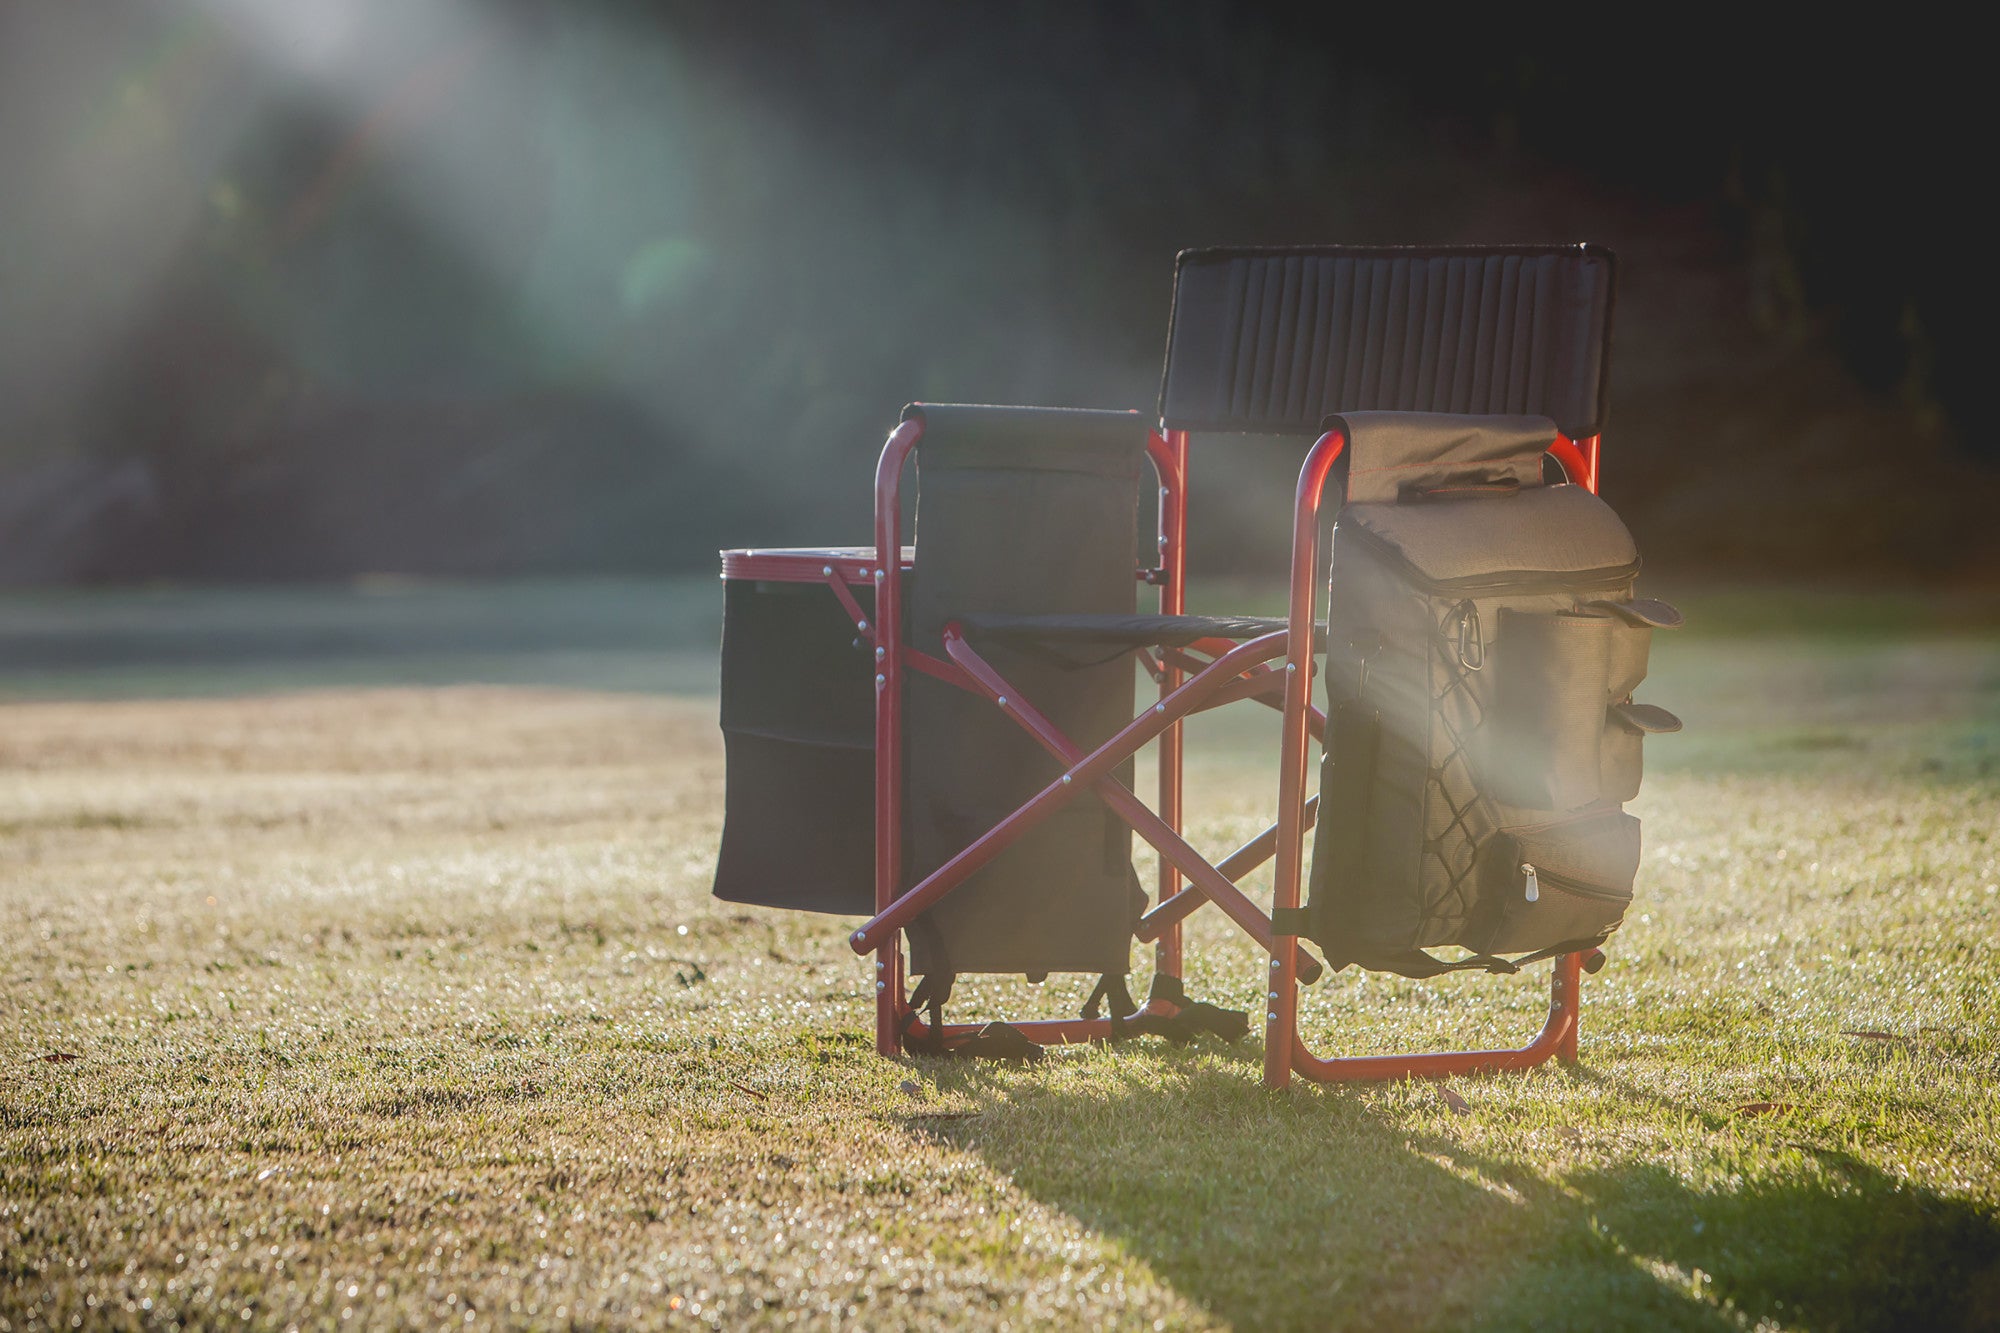 Ole Miss Rebels - Fusion Camping Chair